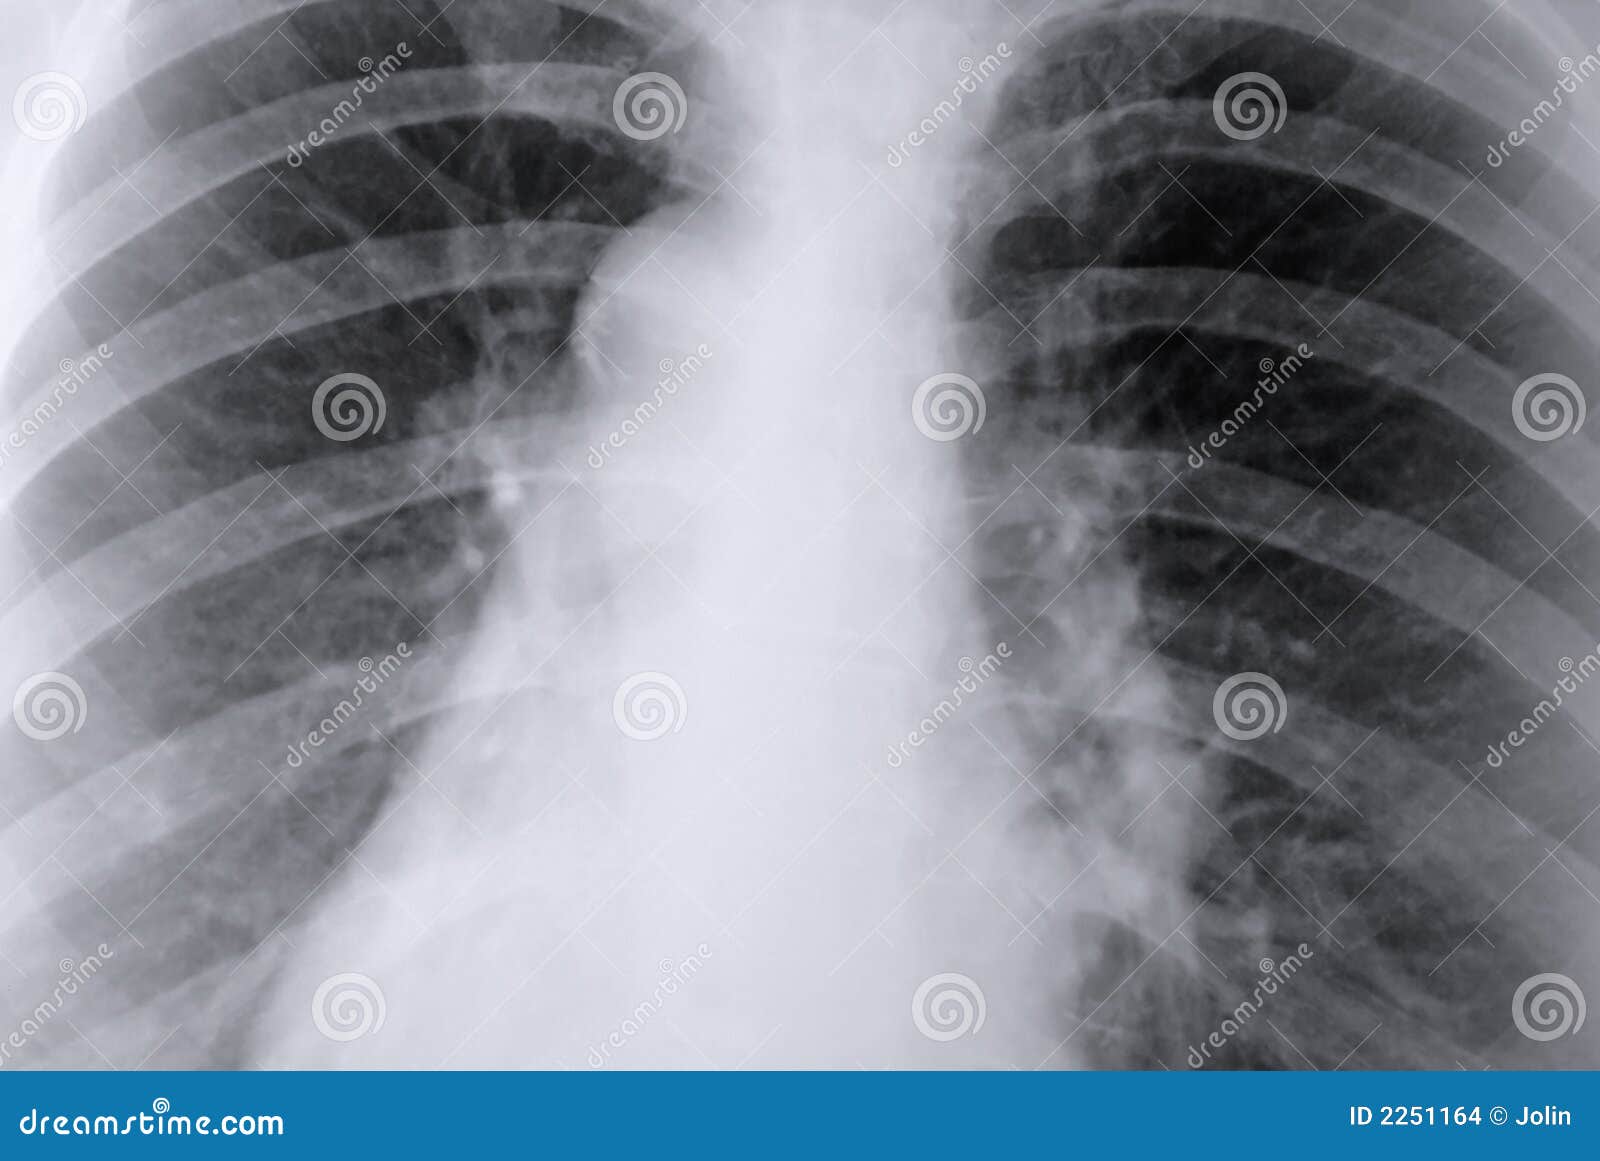 thorax x-ray of the lungs